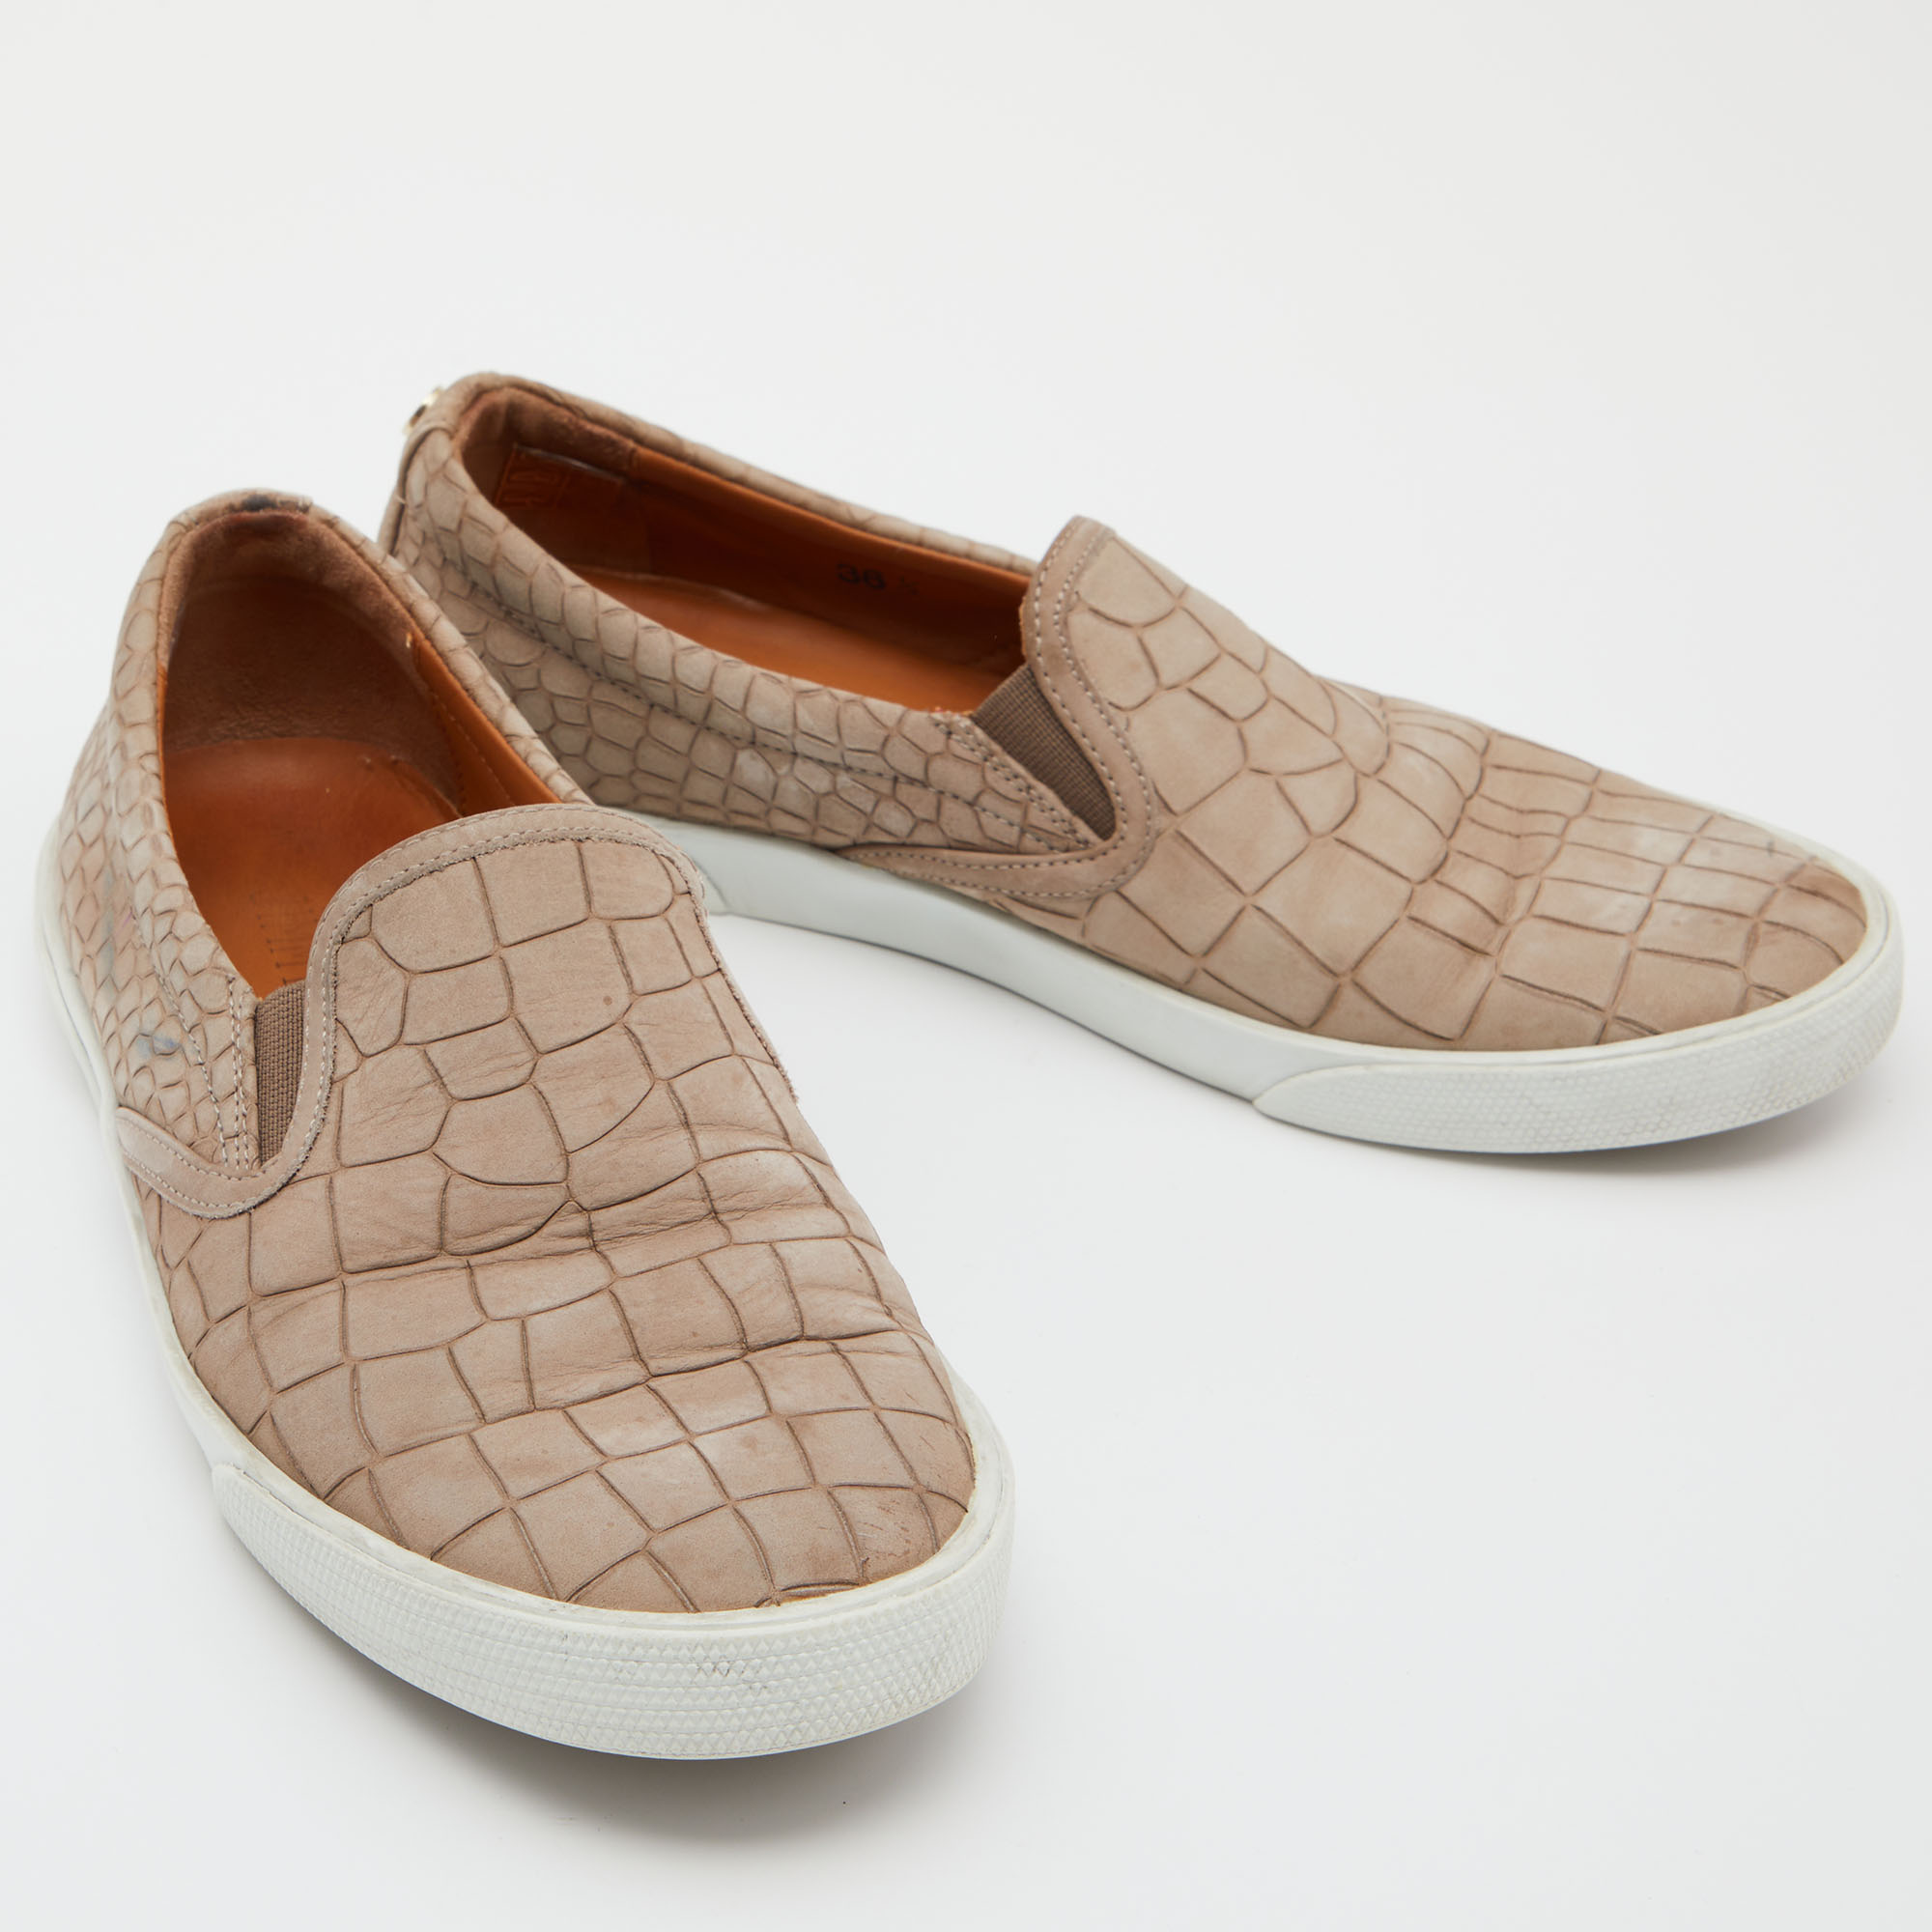 Jimmy Choo Taupe Croc Embossed Leather Slip On Sneakers Size 36.5